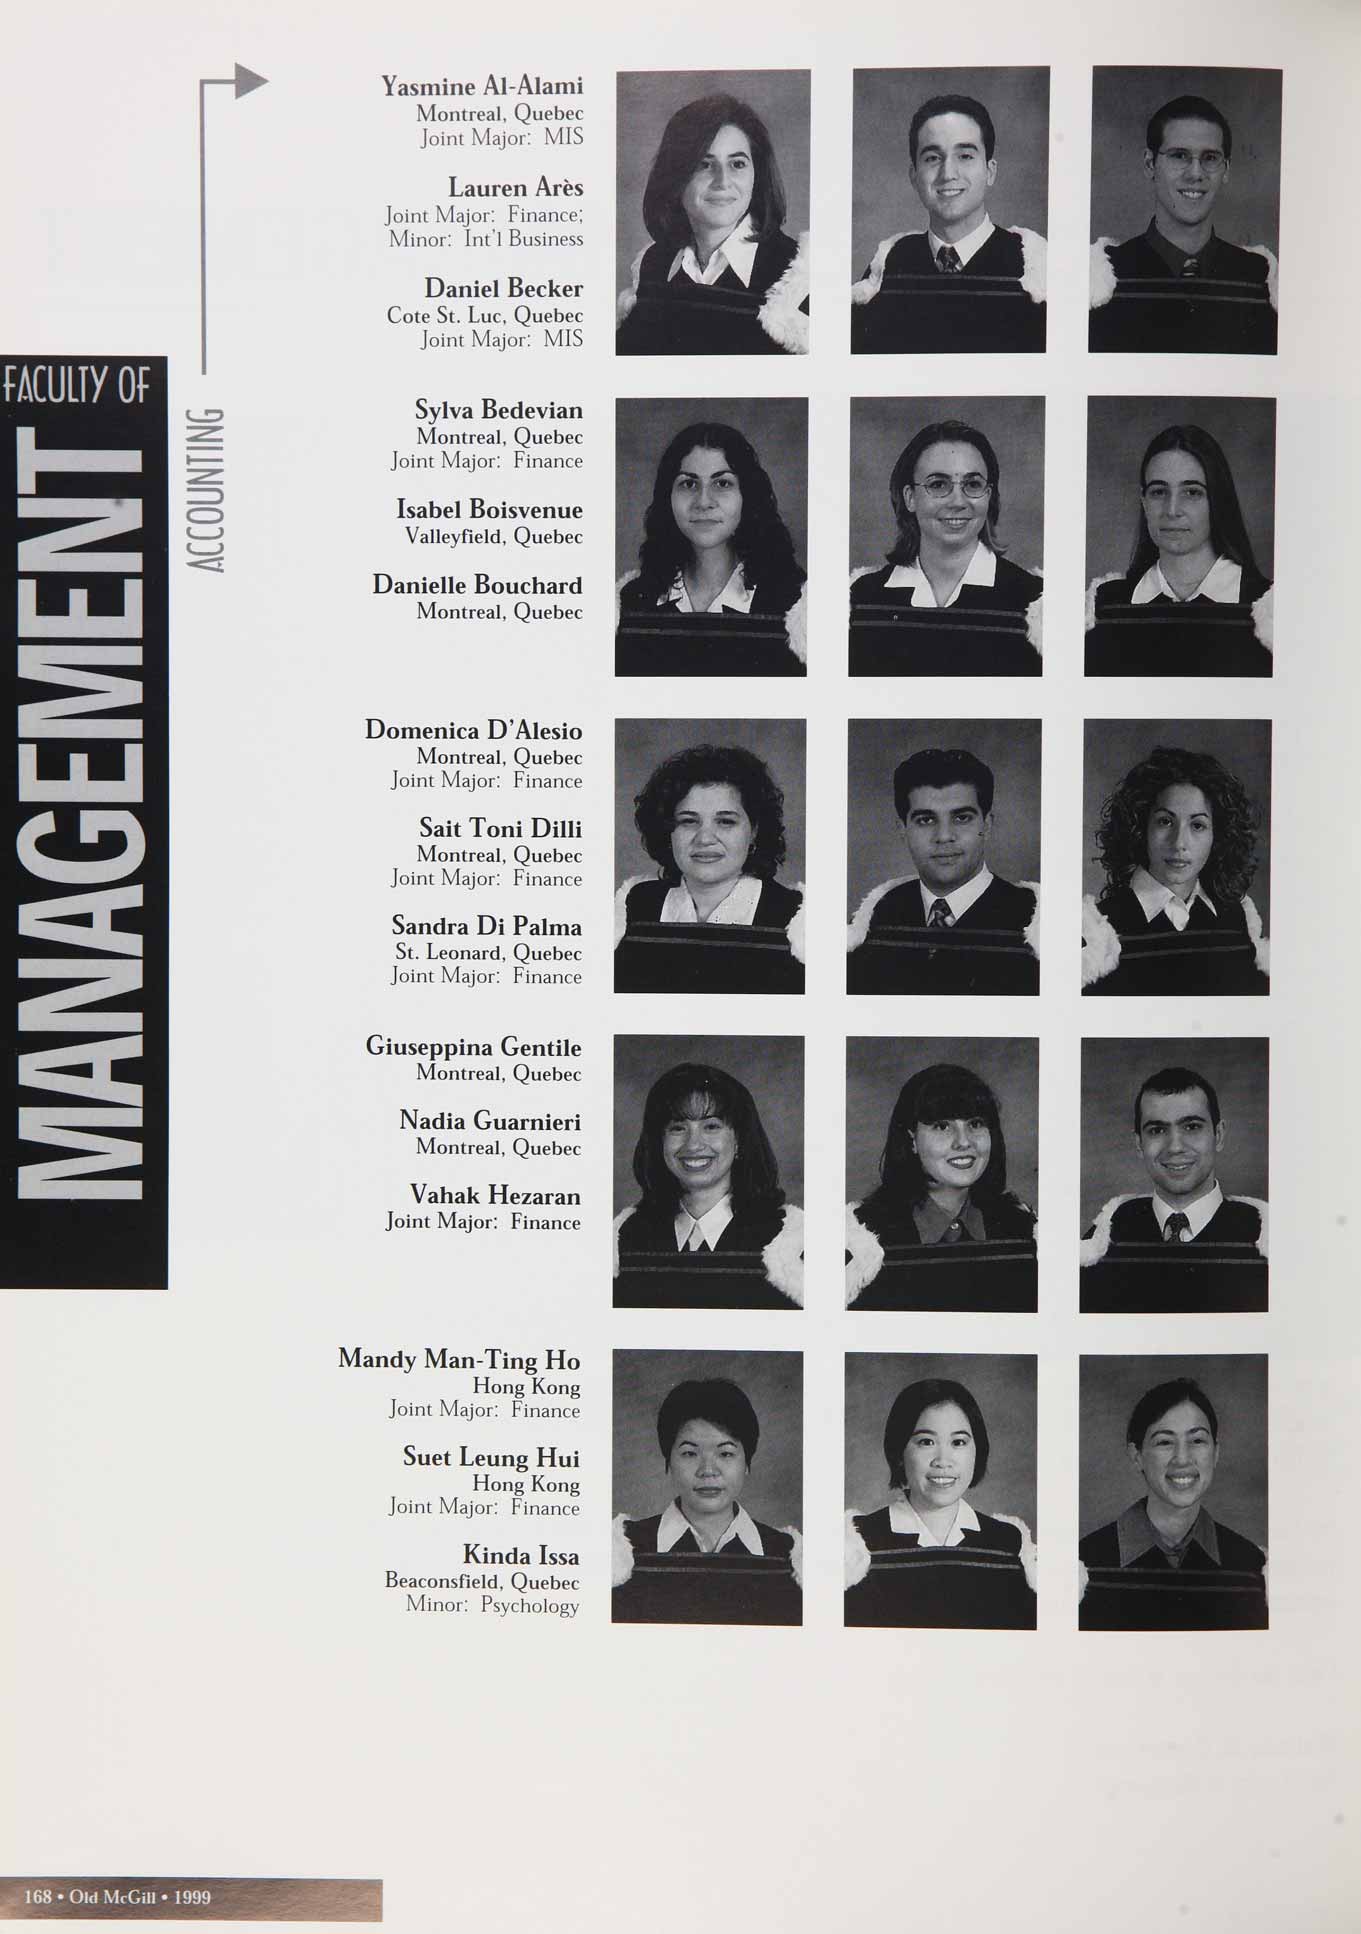 McGill Yearbook: 1999